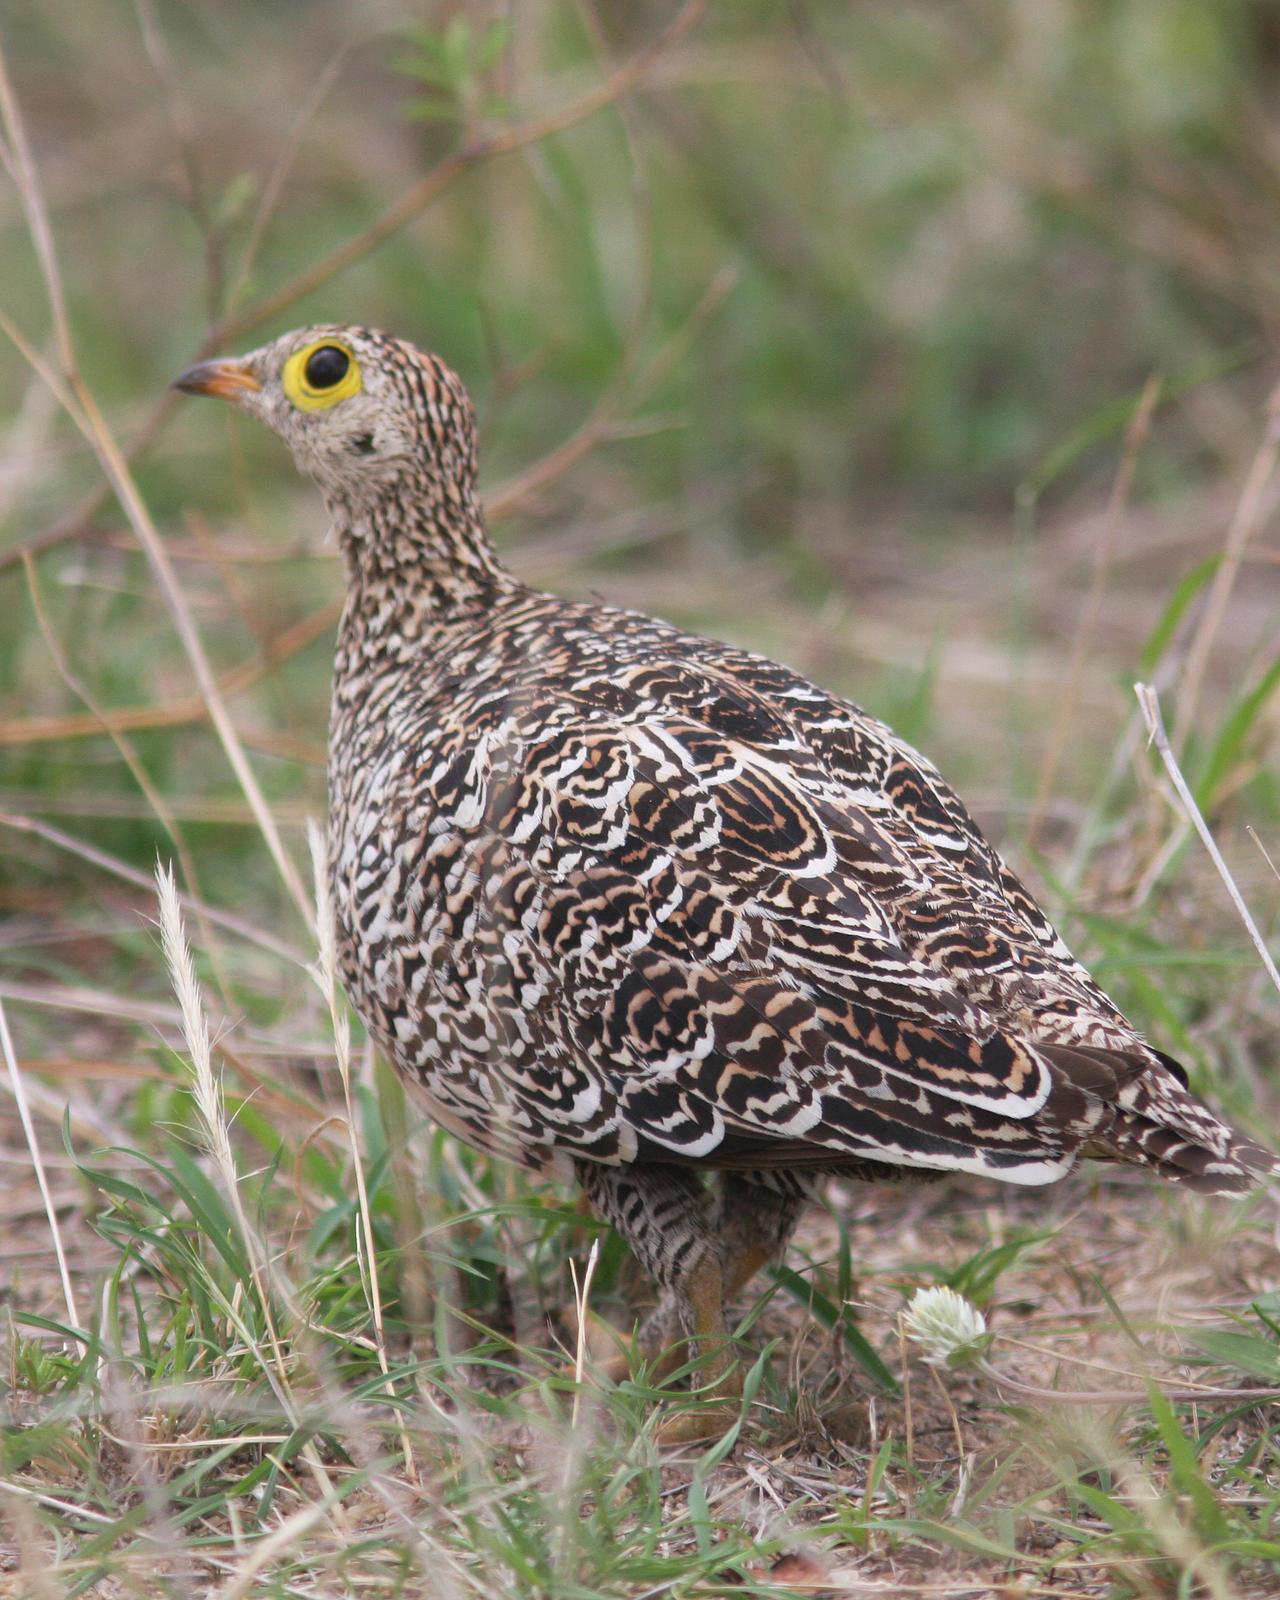 Double-banded Sandgrouse Photo by Henk Baptist